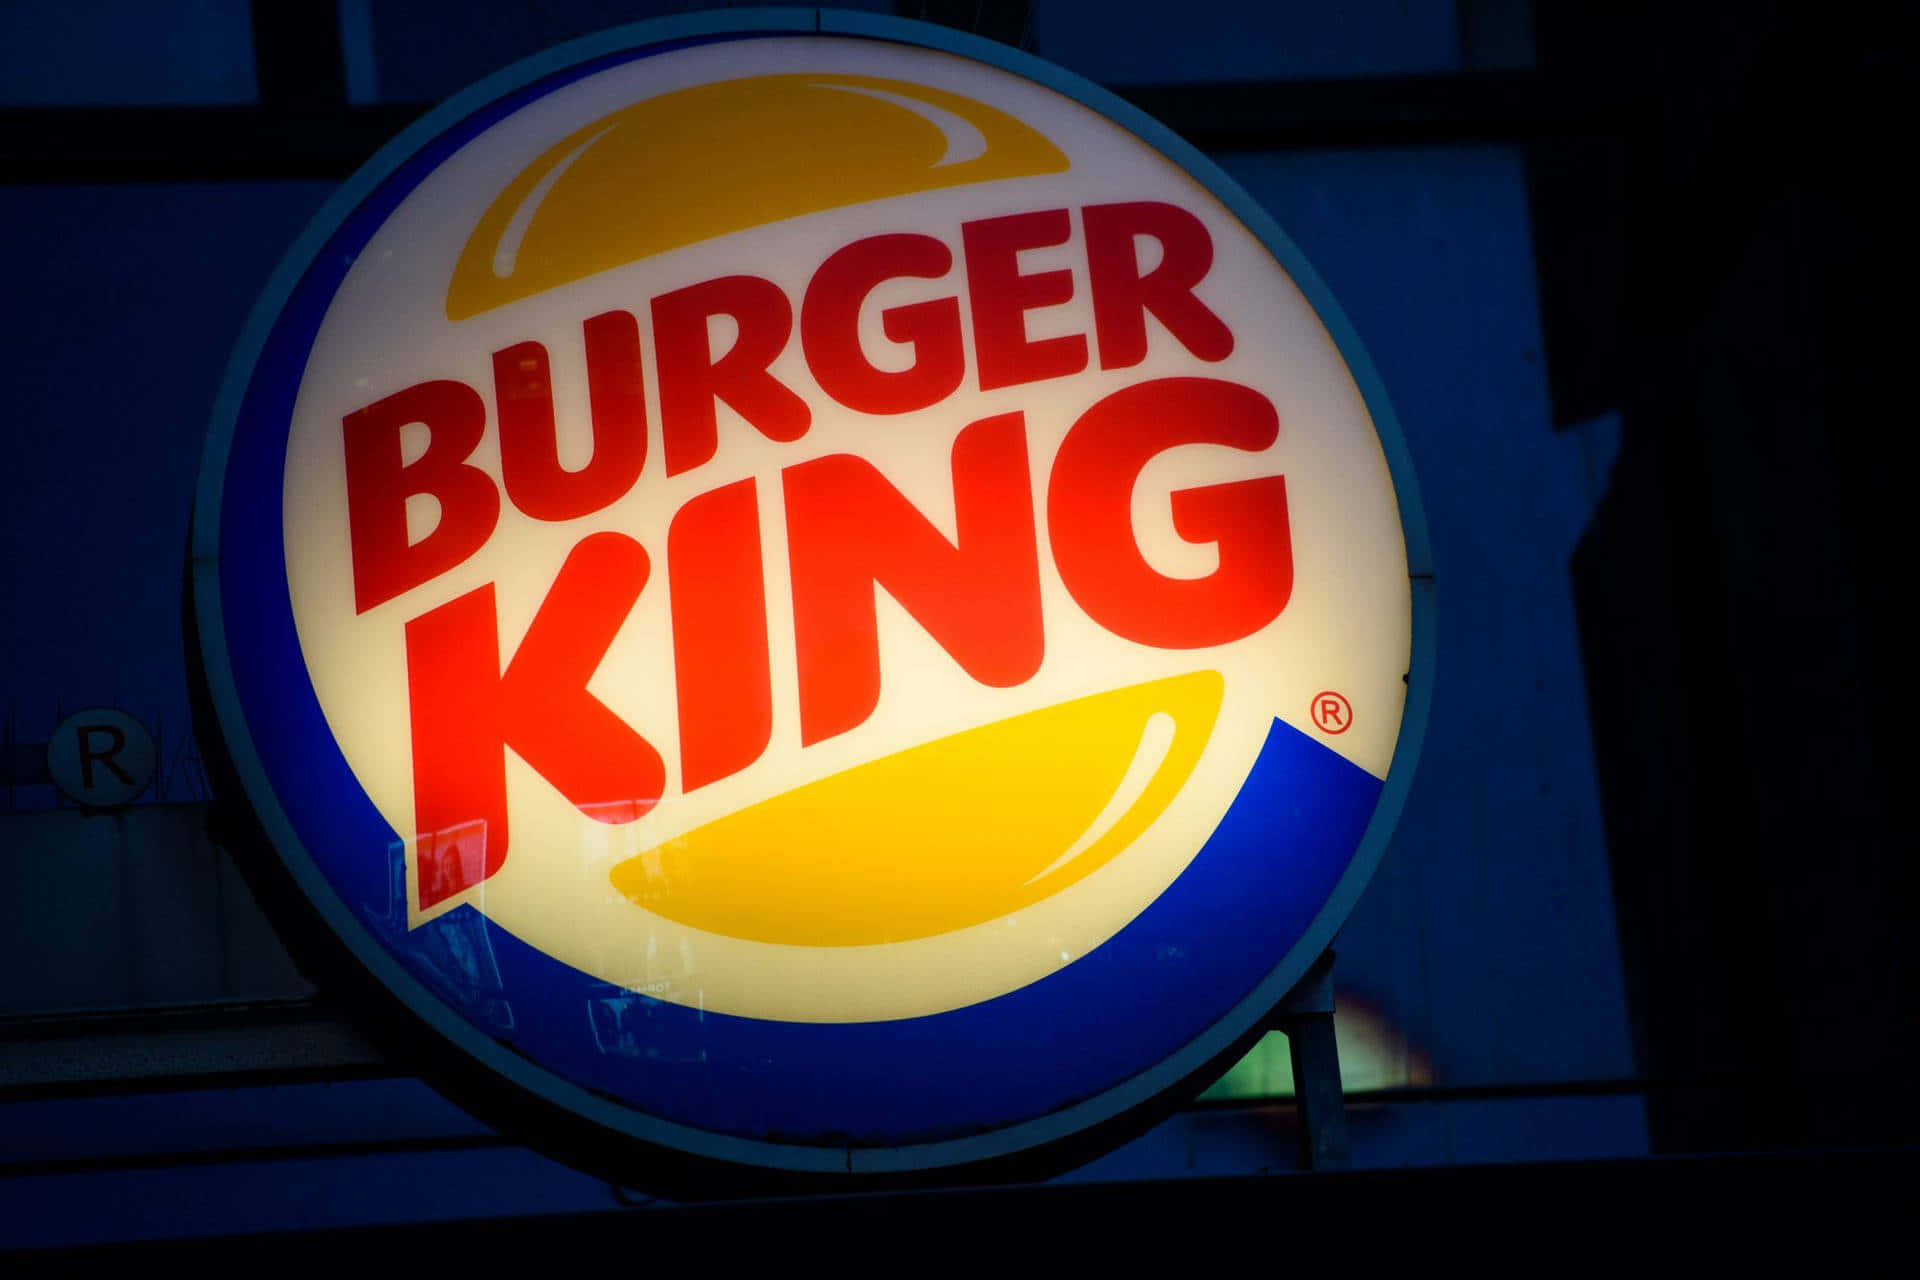 Burger King Sign In The Dark